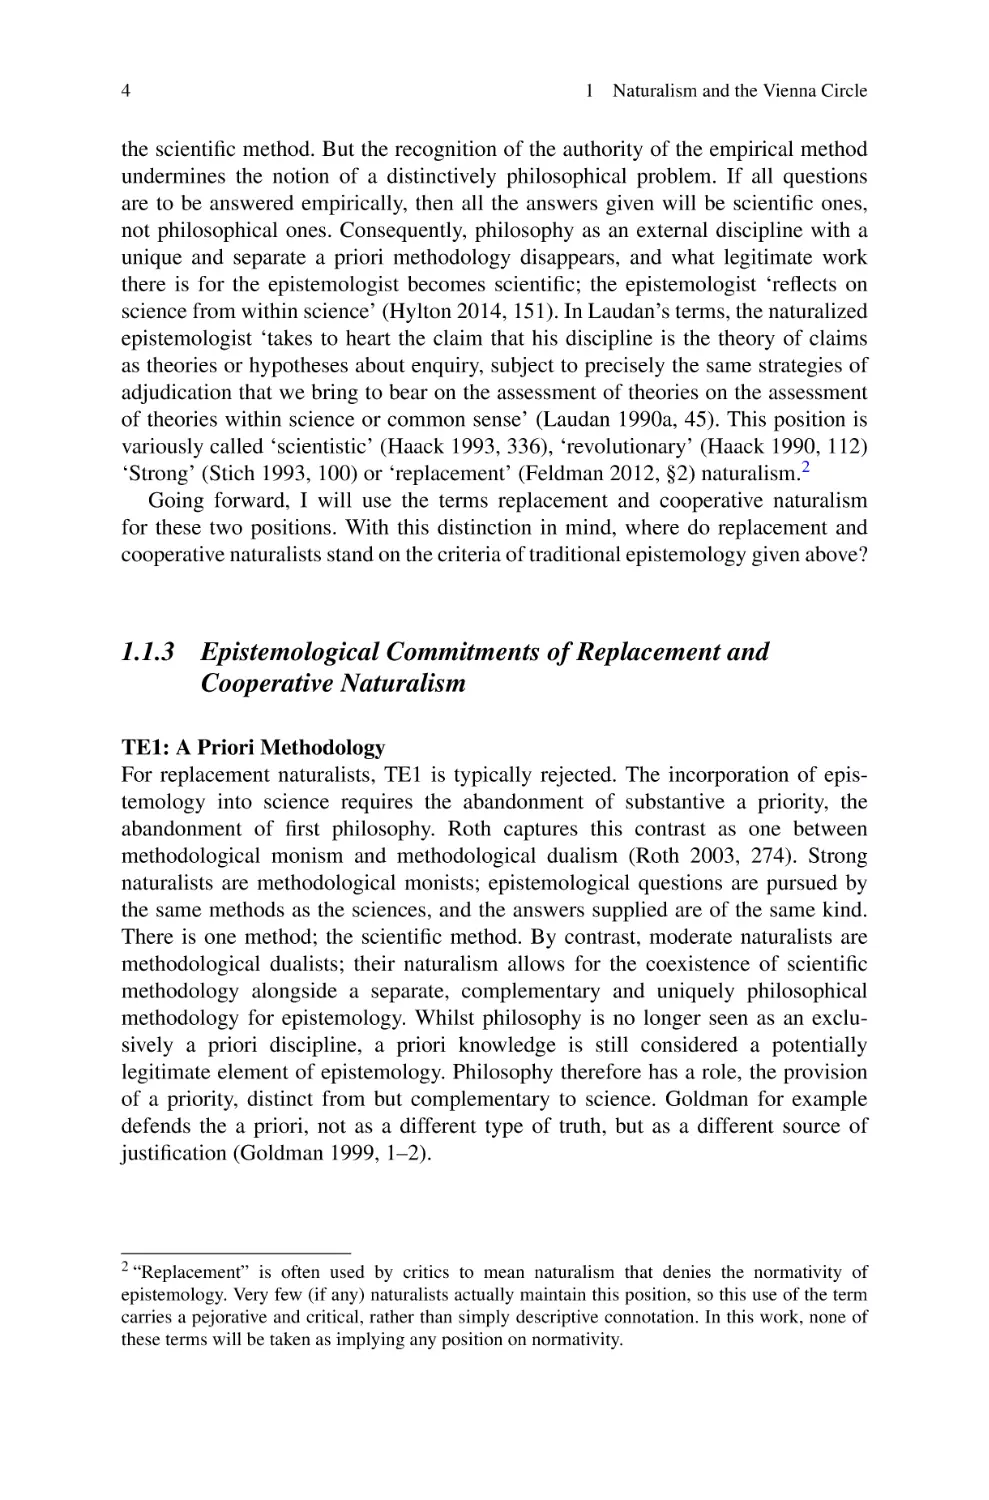 1.1.3 Epistemological Commitments of Replacement and Cooperative Naturalism